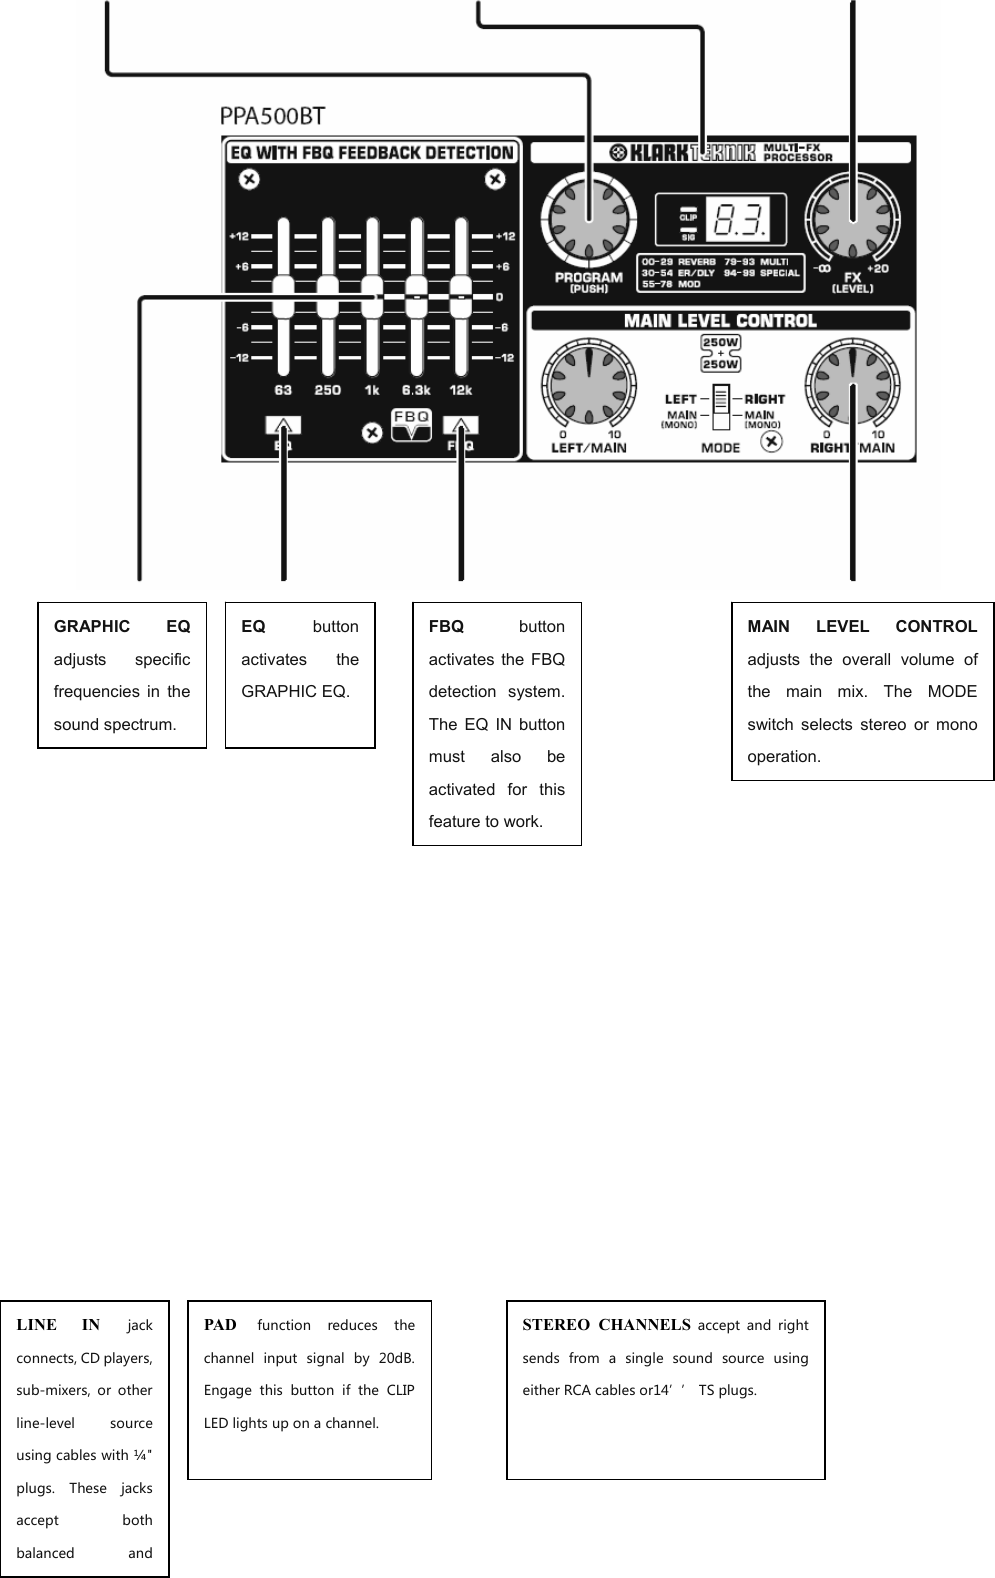 GRAPHIC  EQadjusts  specific frequencies  in  the sound spectrum.EQ  buttonactivates  theGRAPHIC EQ.FBQ  button activates  the  FBQ detection  system. The  EQ  IN  button must  also  beactivated  for  this feature to work.MAIN  LEVEL  CONTROLadjusts  the  overall  volume  ofthe  main  mix.  The  MODEswitch  selects  stereo  or  mono operation.LINE  IN jack connects, CD players, sub-mixers,  or  otherline-level  source using cables with ¼&quot;plugs.  These  jacksaccept bothbalanced and PAD function  reduces thechannel  input  signal  by  20dB.Engage  this  button if  the  CLIPLED lights up on a channel.STEREO  CHANNELS accept  and  rightsends  from a single sound  source  usingeither RCA cables or14’’ TS plugs.